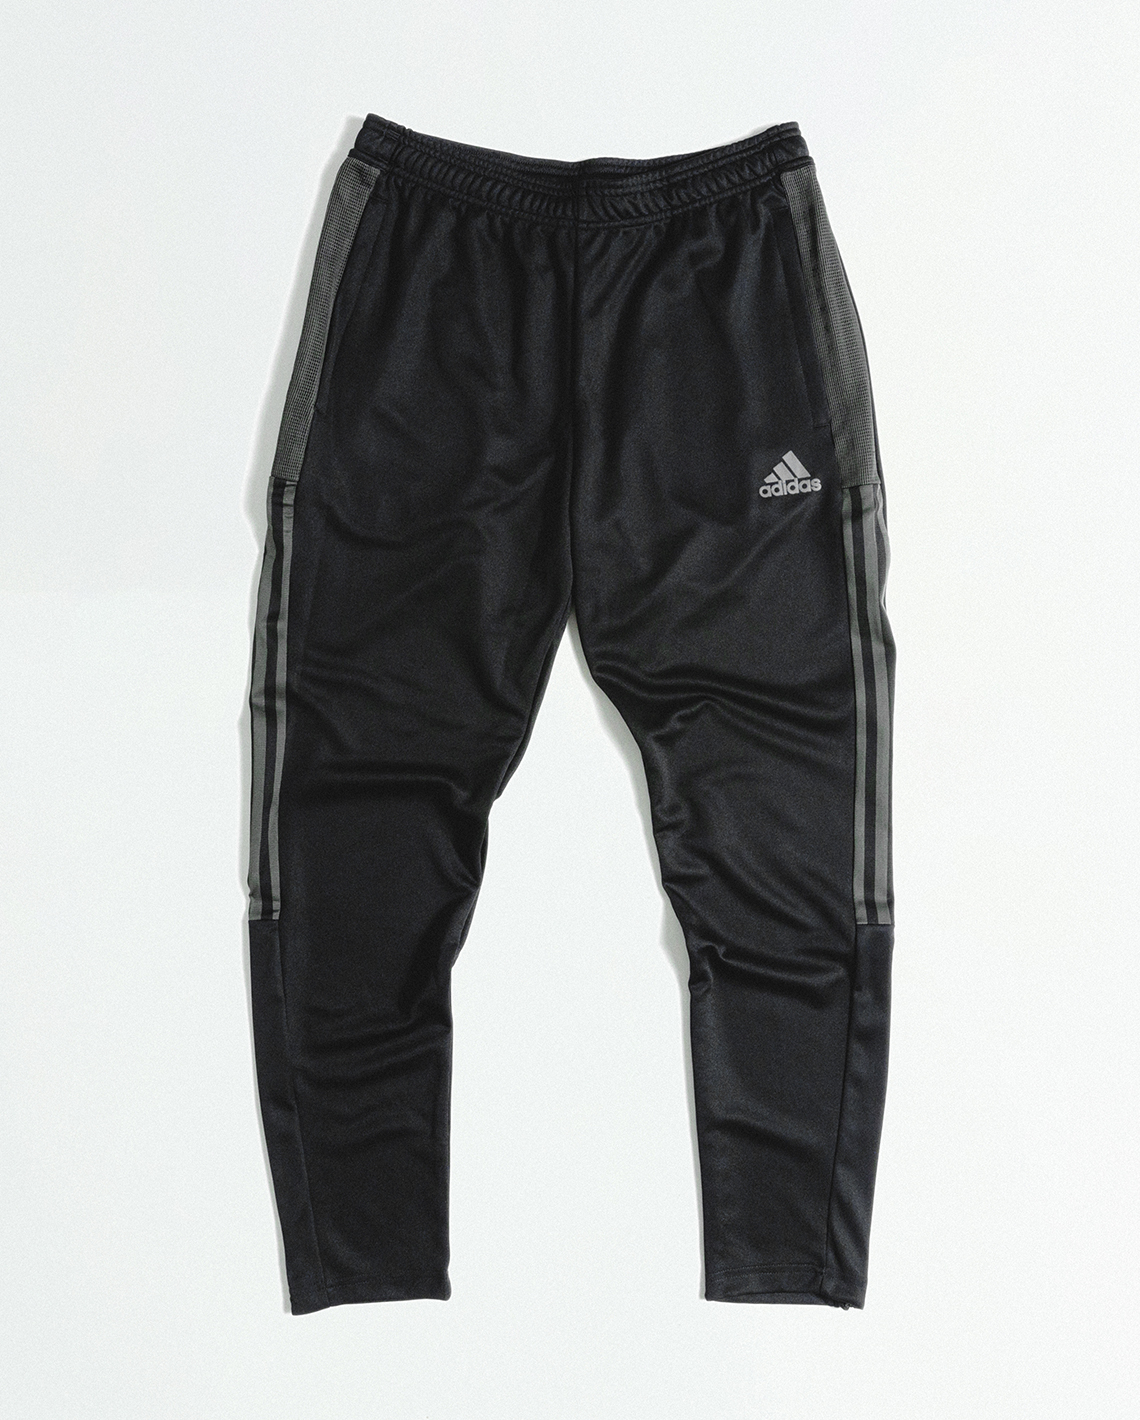 adidas apparel shopping guide march 2022 outfit 2 gallery 5